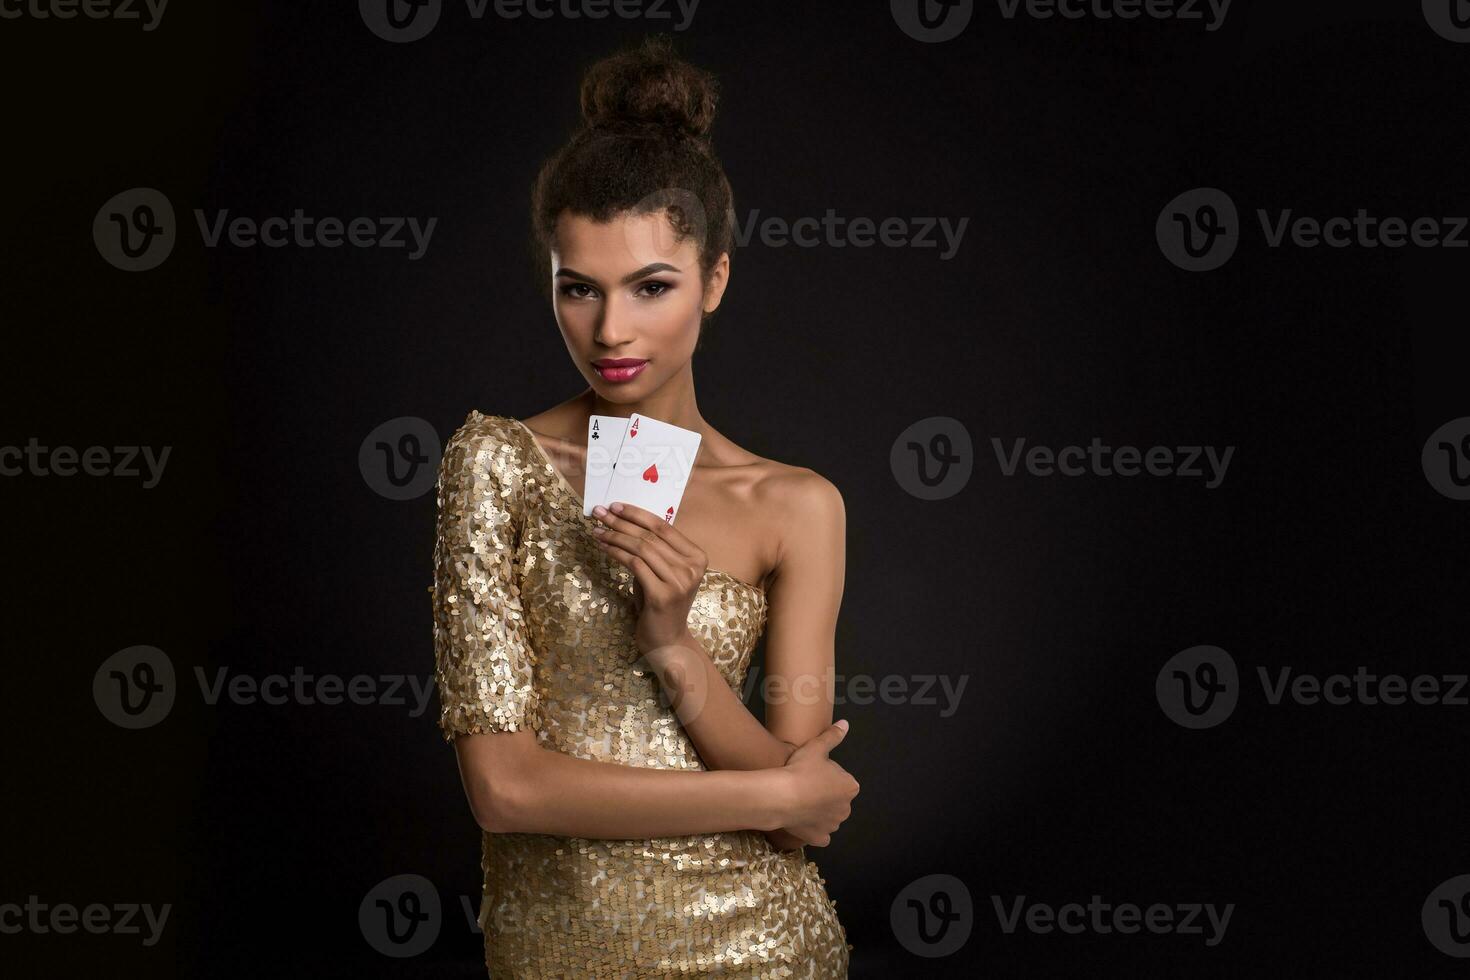 Woman winning - Young woman in a classy gold dress holding two aces, a poker of aces card combination. photo